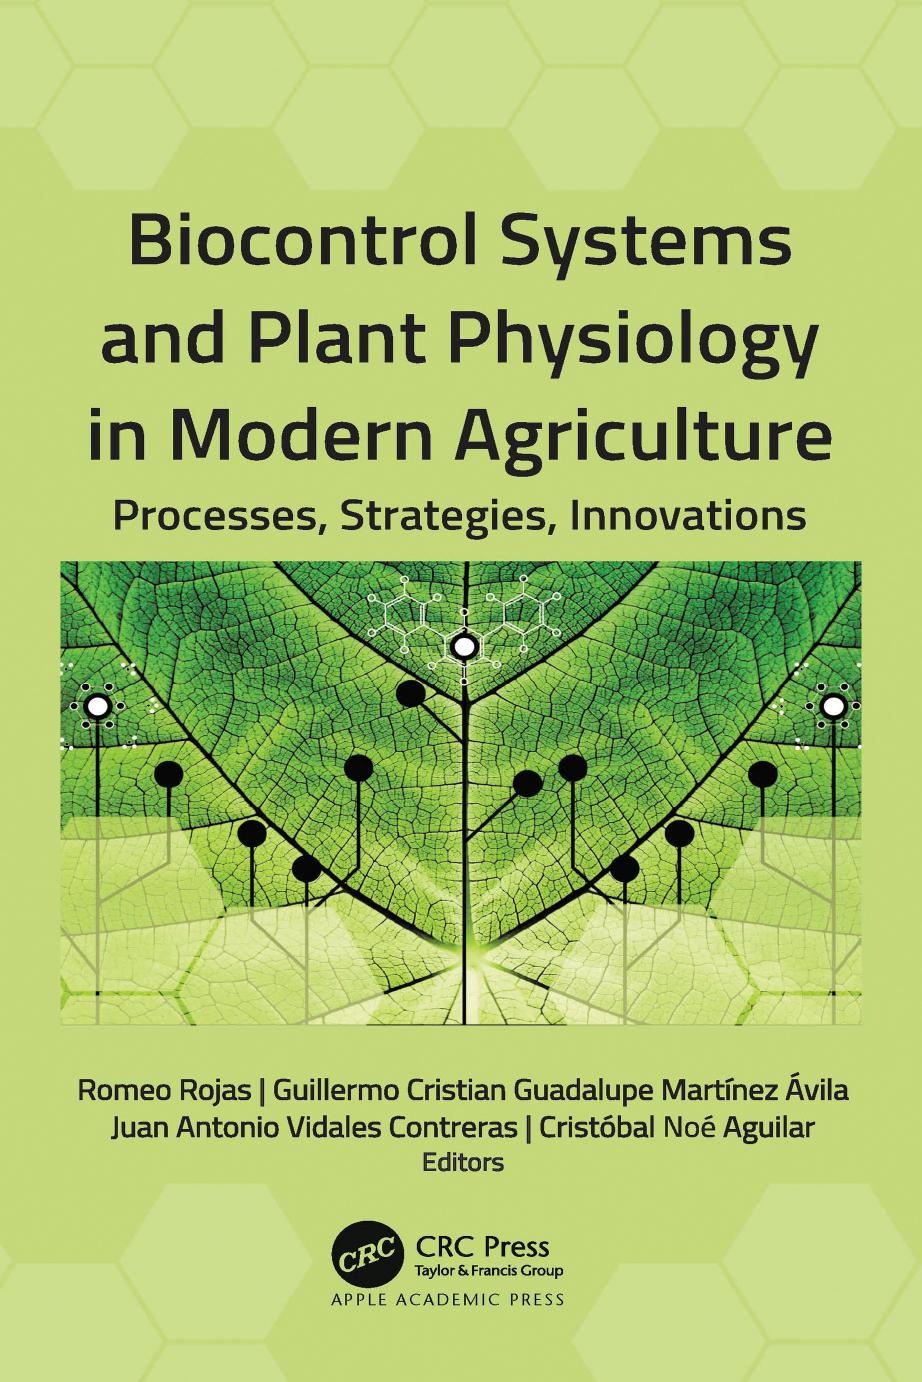 Biocontrol Systems and Plant Physiology in Modern Agriculture: Processes, Strategies, Innovations